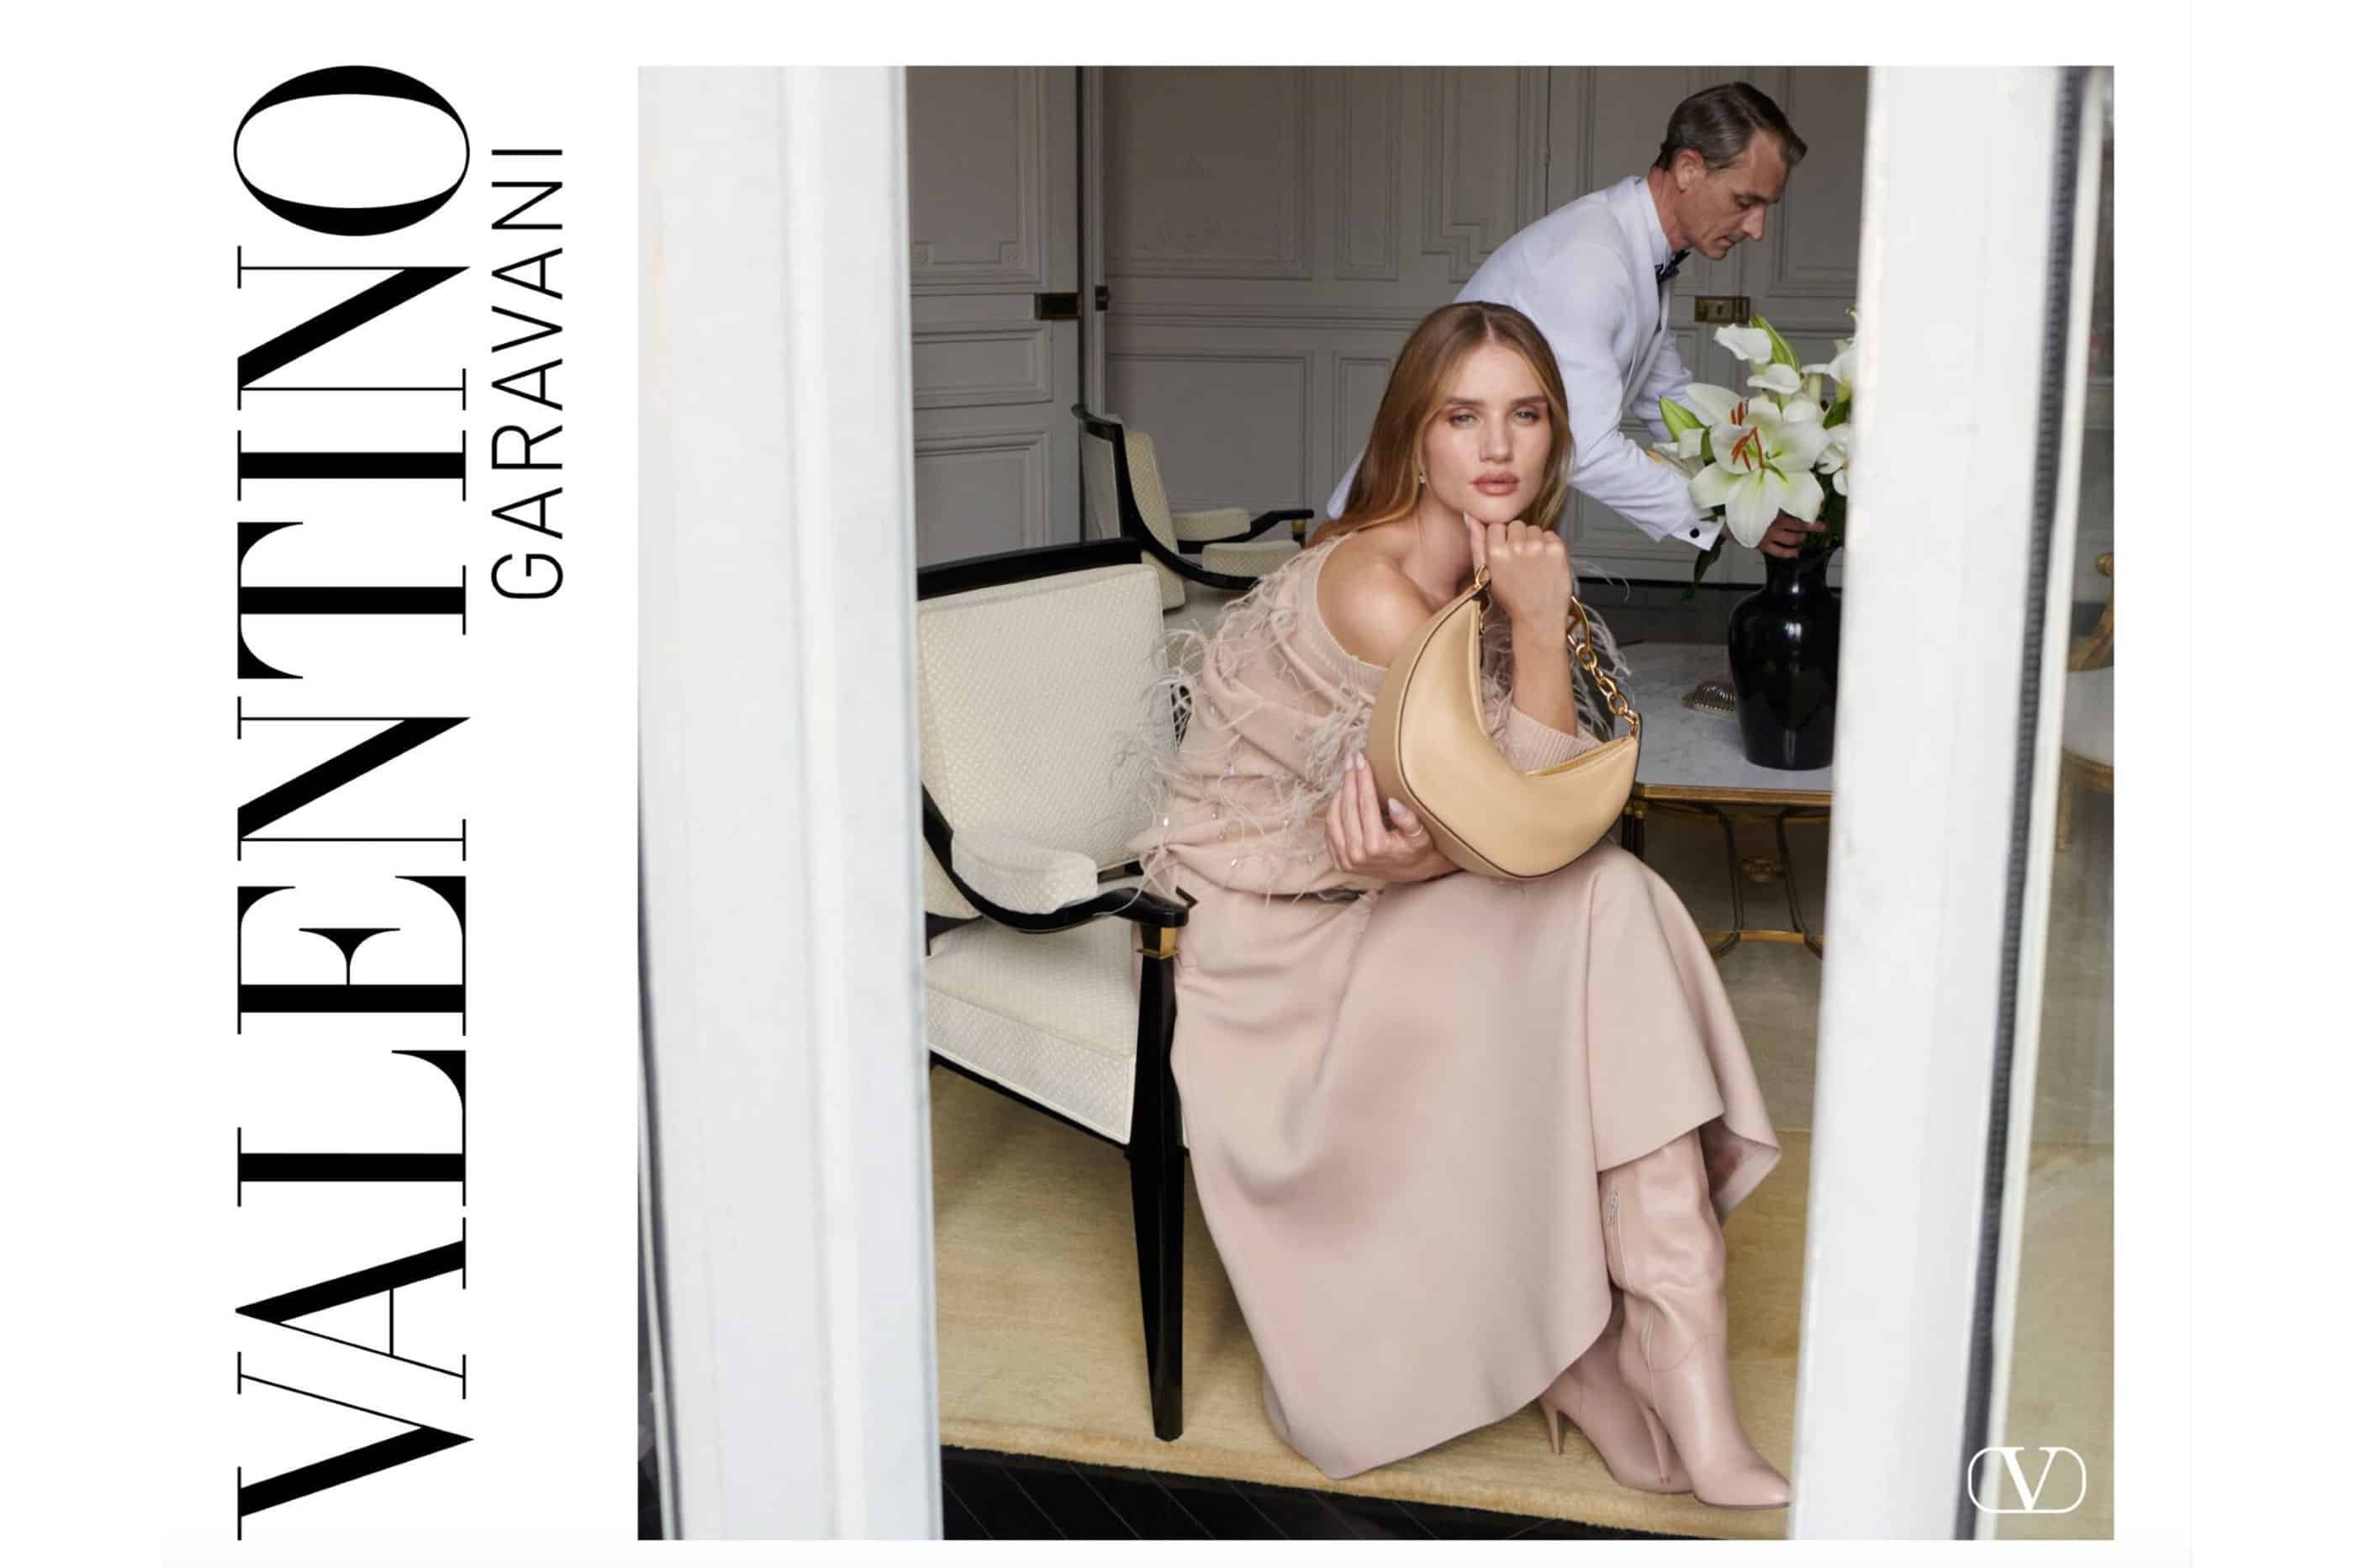 EXCLUSIVE: Emma Laird Appears in First Campaign for Louis Vuitton